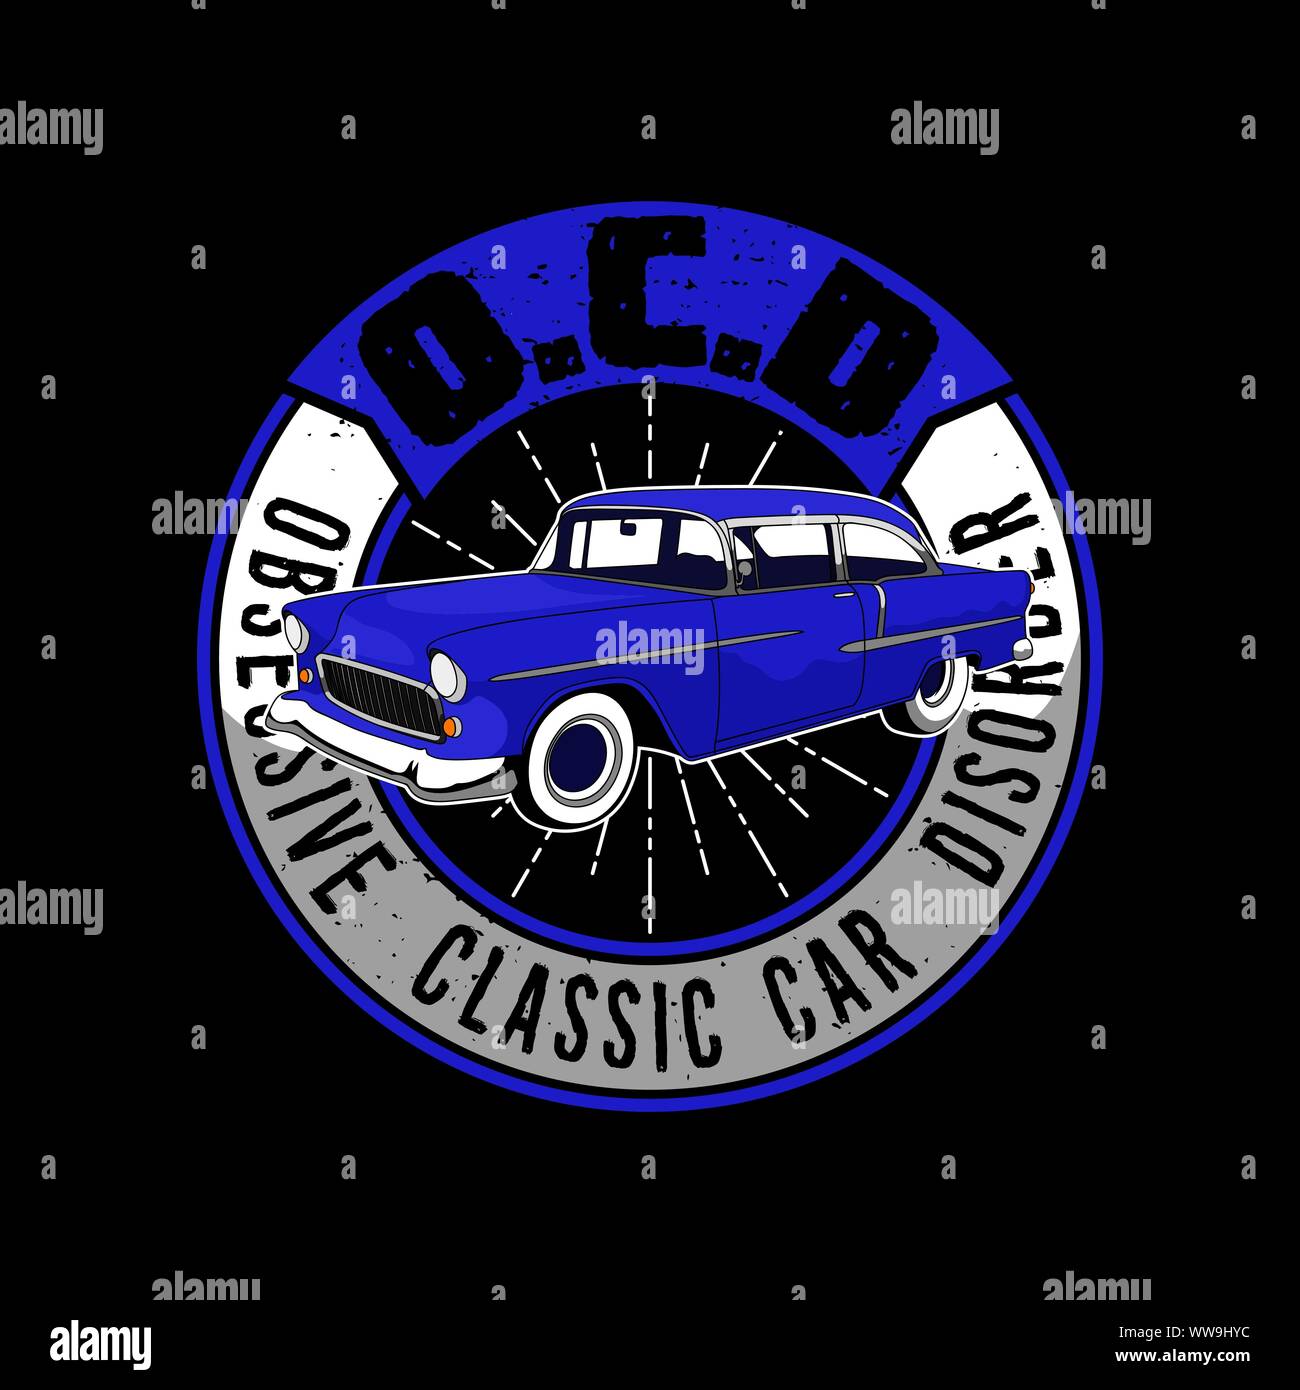 Trendy Fanatic Car T Shirt Quote and Slogan. Obsessive classic car disorder. Blue car illustration. Stock Vector